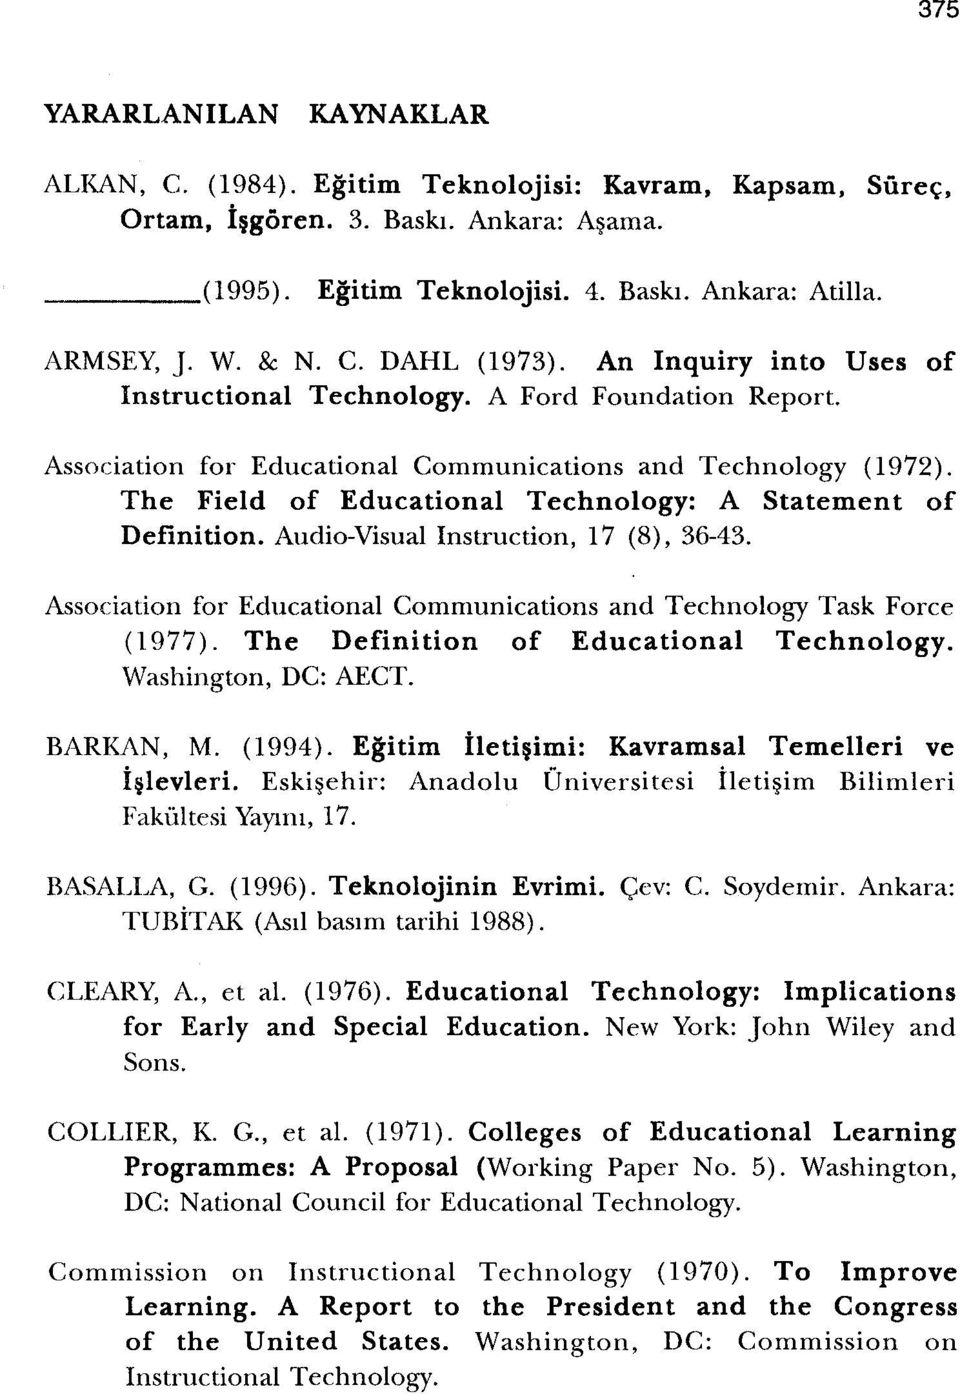 The Field of Educational Technology: A Statement of Definition. Audio-Visual Instruction, 17 (8), 36-43. Association for Educational Communications and Technology Task Force (1977).